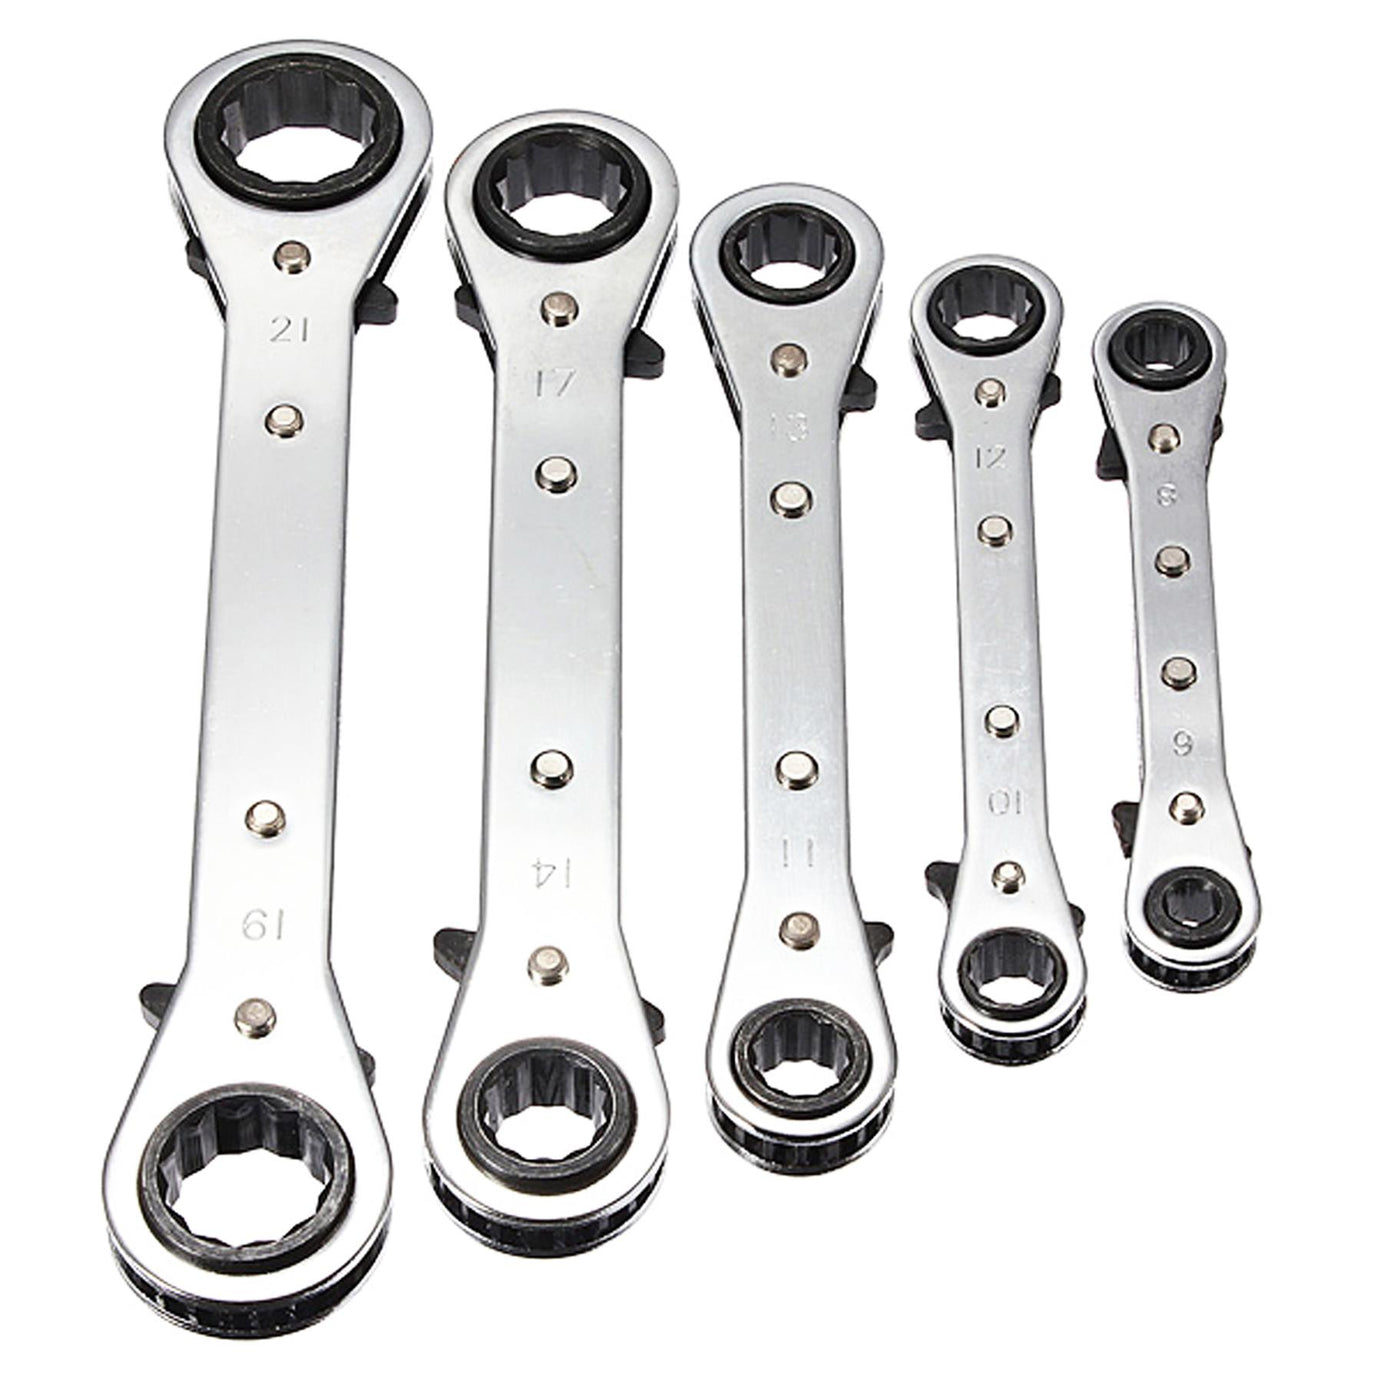 Ratcheting Ring Spanner Set 5 Metric Ratchet Ring Spanners 6-21mm Spanners